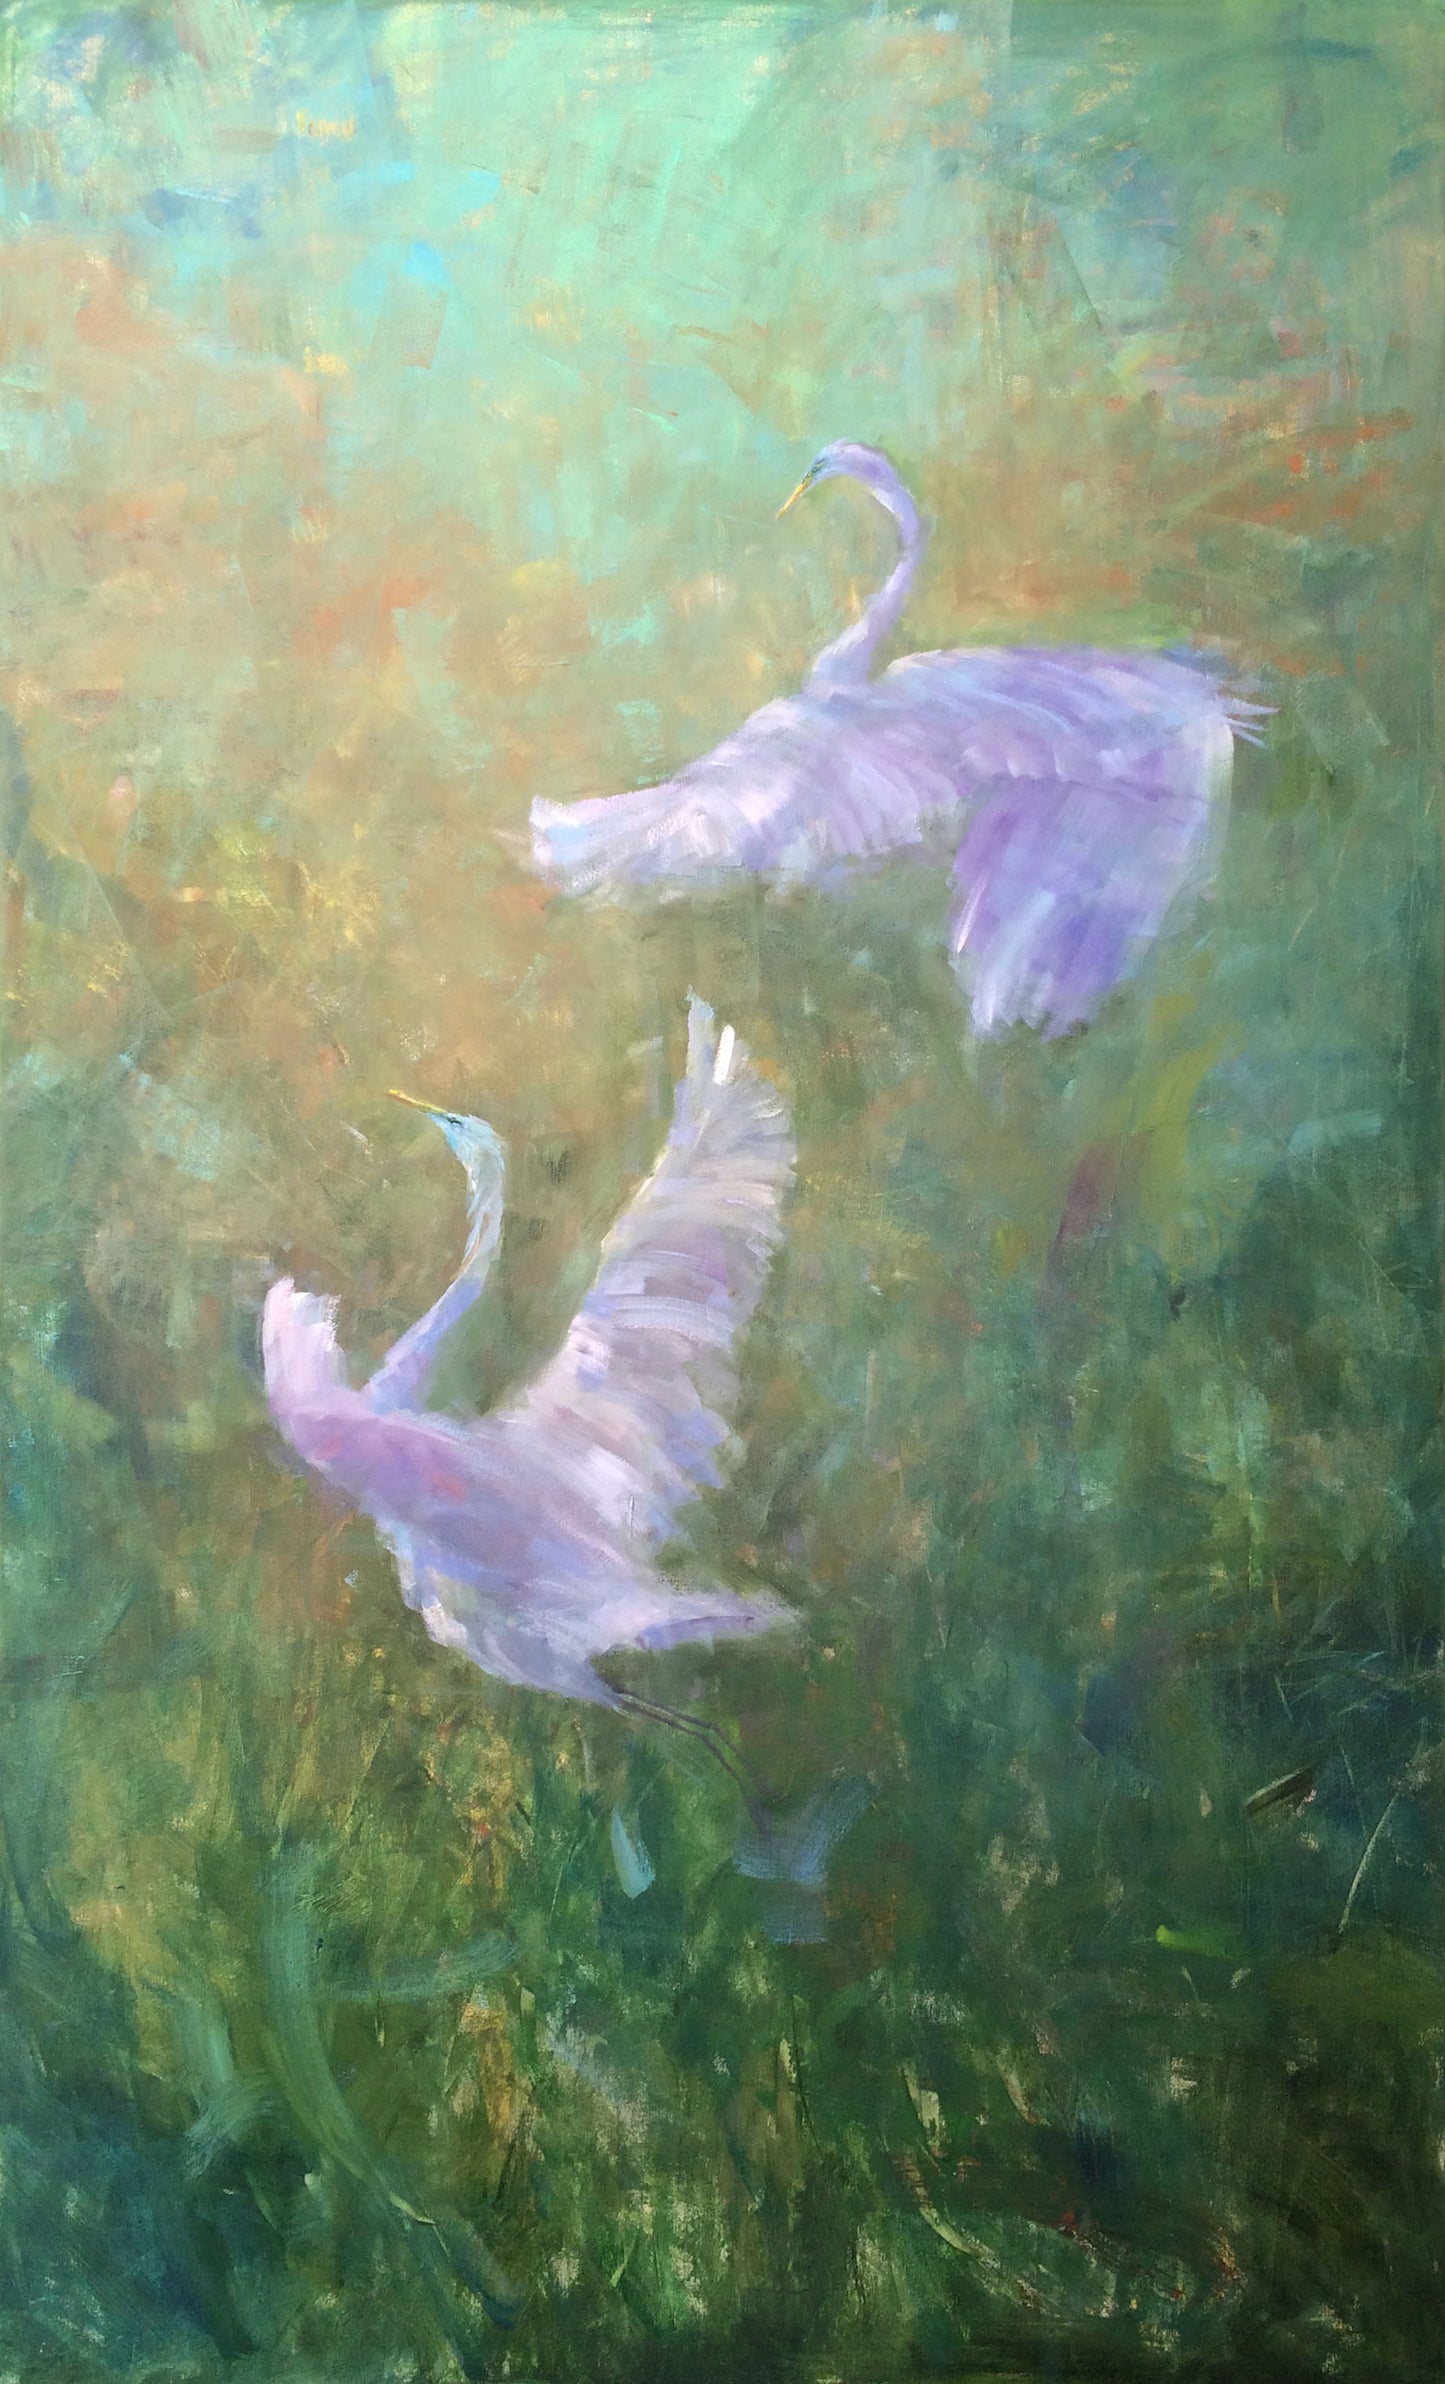 Ascent of the Great Egret II